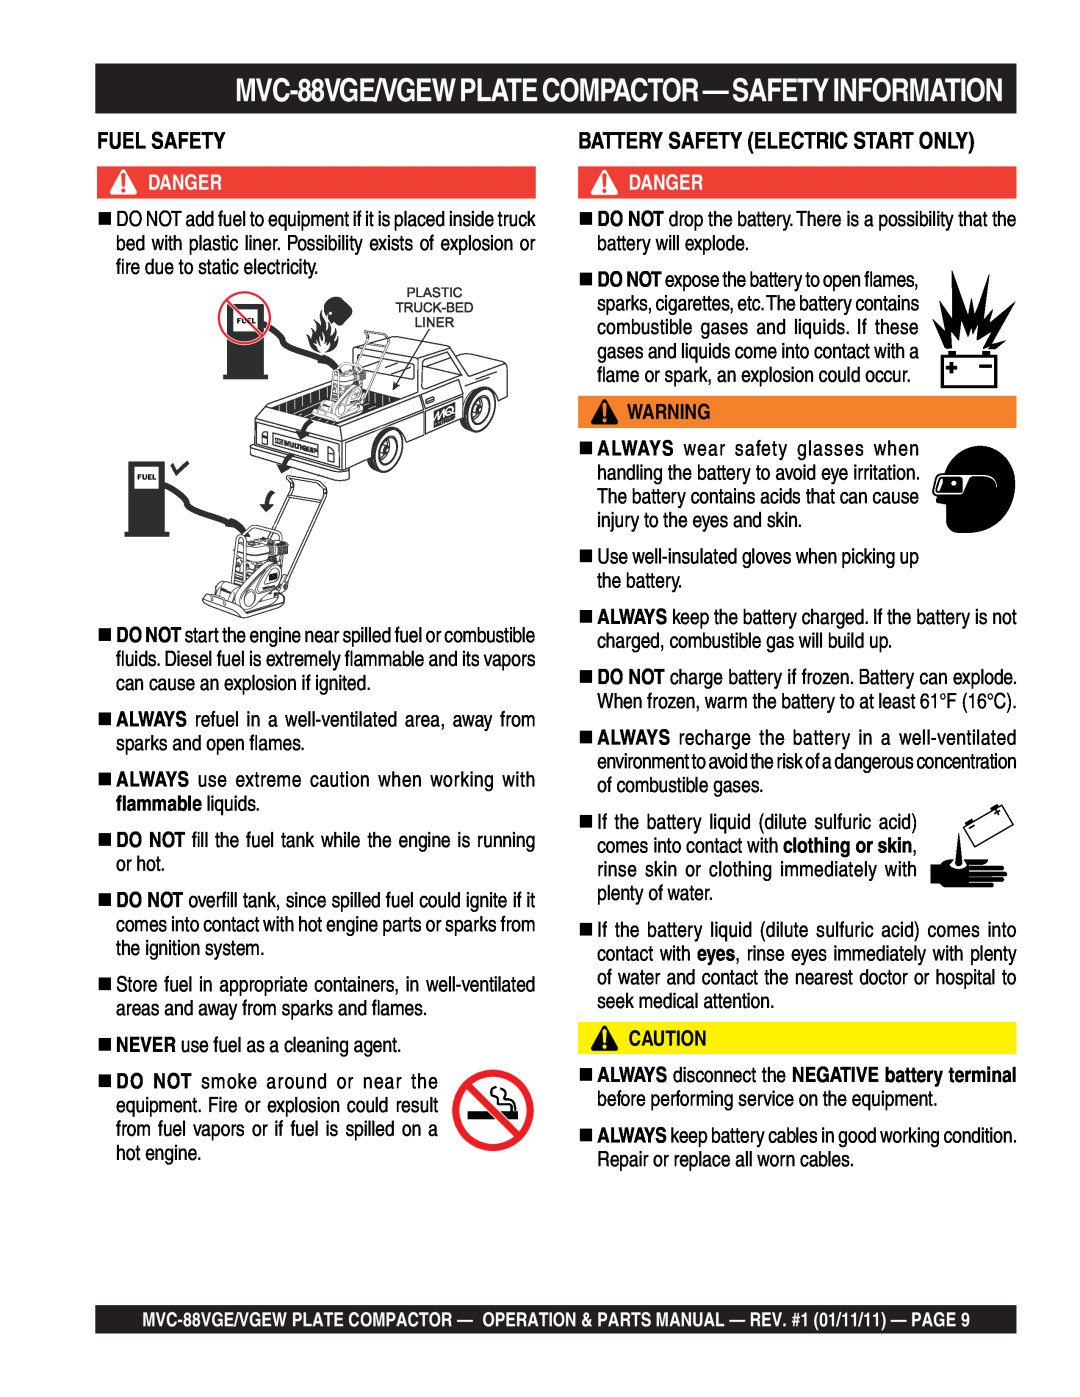 Multiquip manual MVC-88VGE/VGEWPLATECOMPACTOR-SAFETYINFORMATION, Fuel Safety, Battery Safety Electric Start Only, Danger 